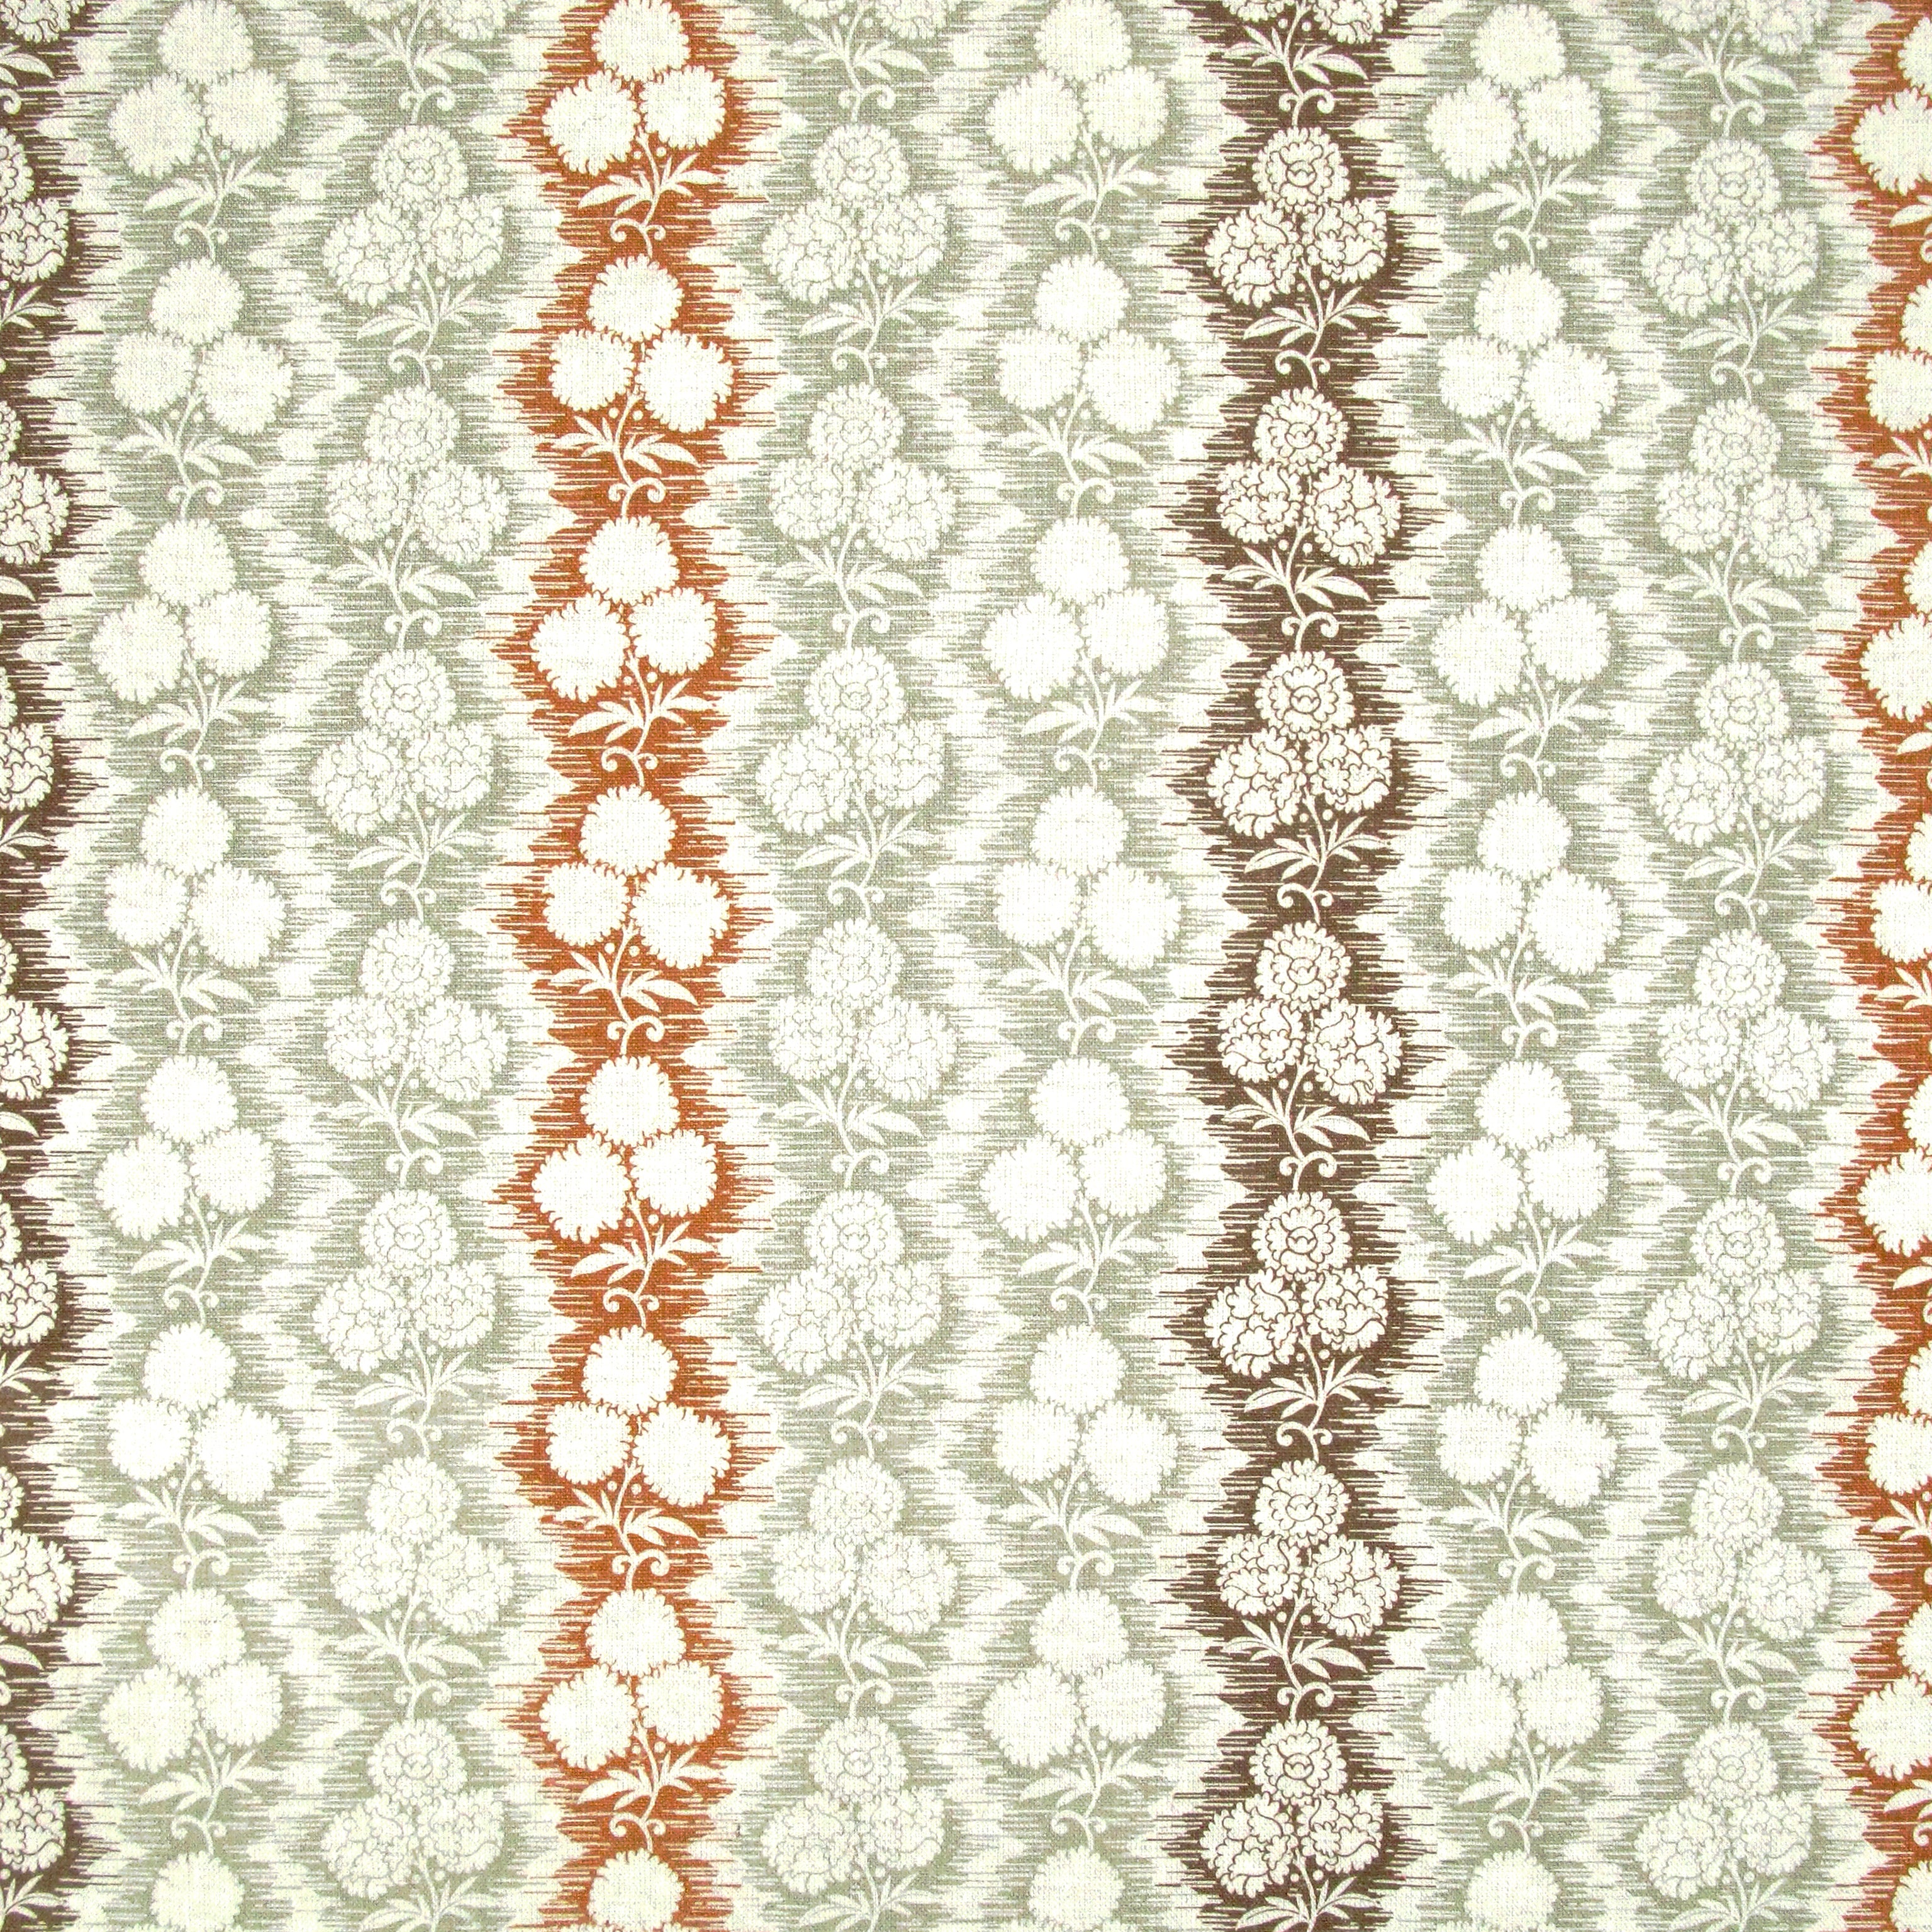 Fabric in a detailed botanical stripe print in shades of green, rust and brown on a white field.